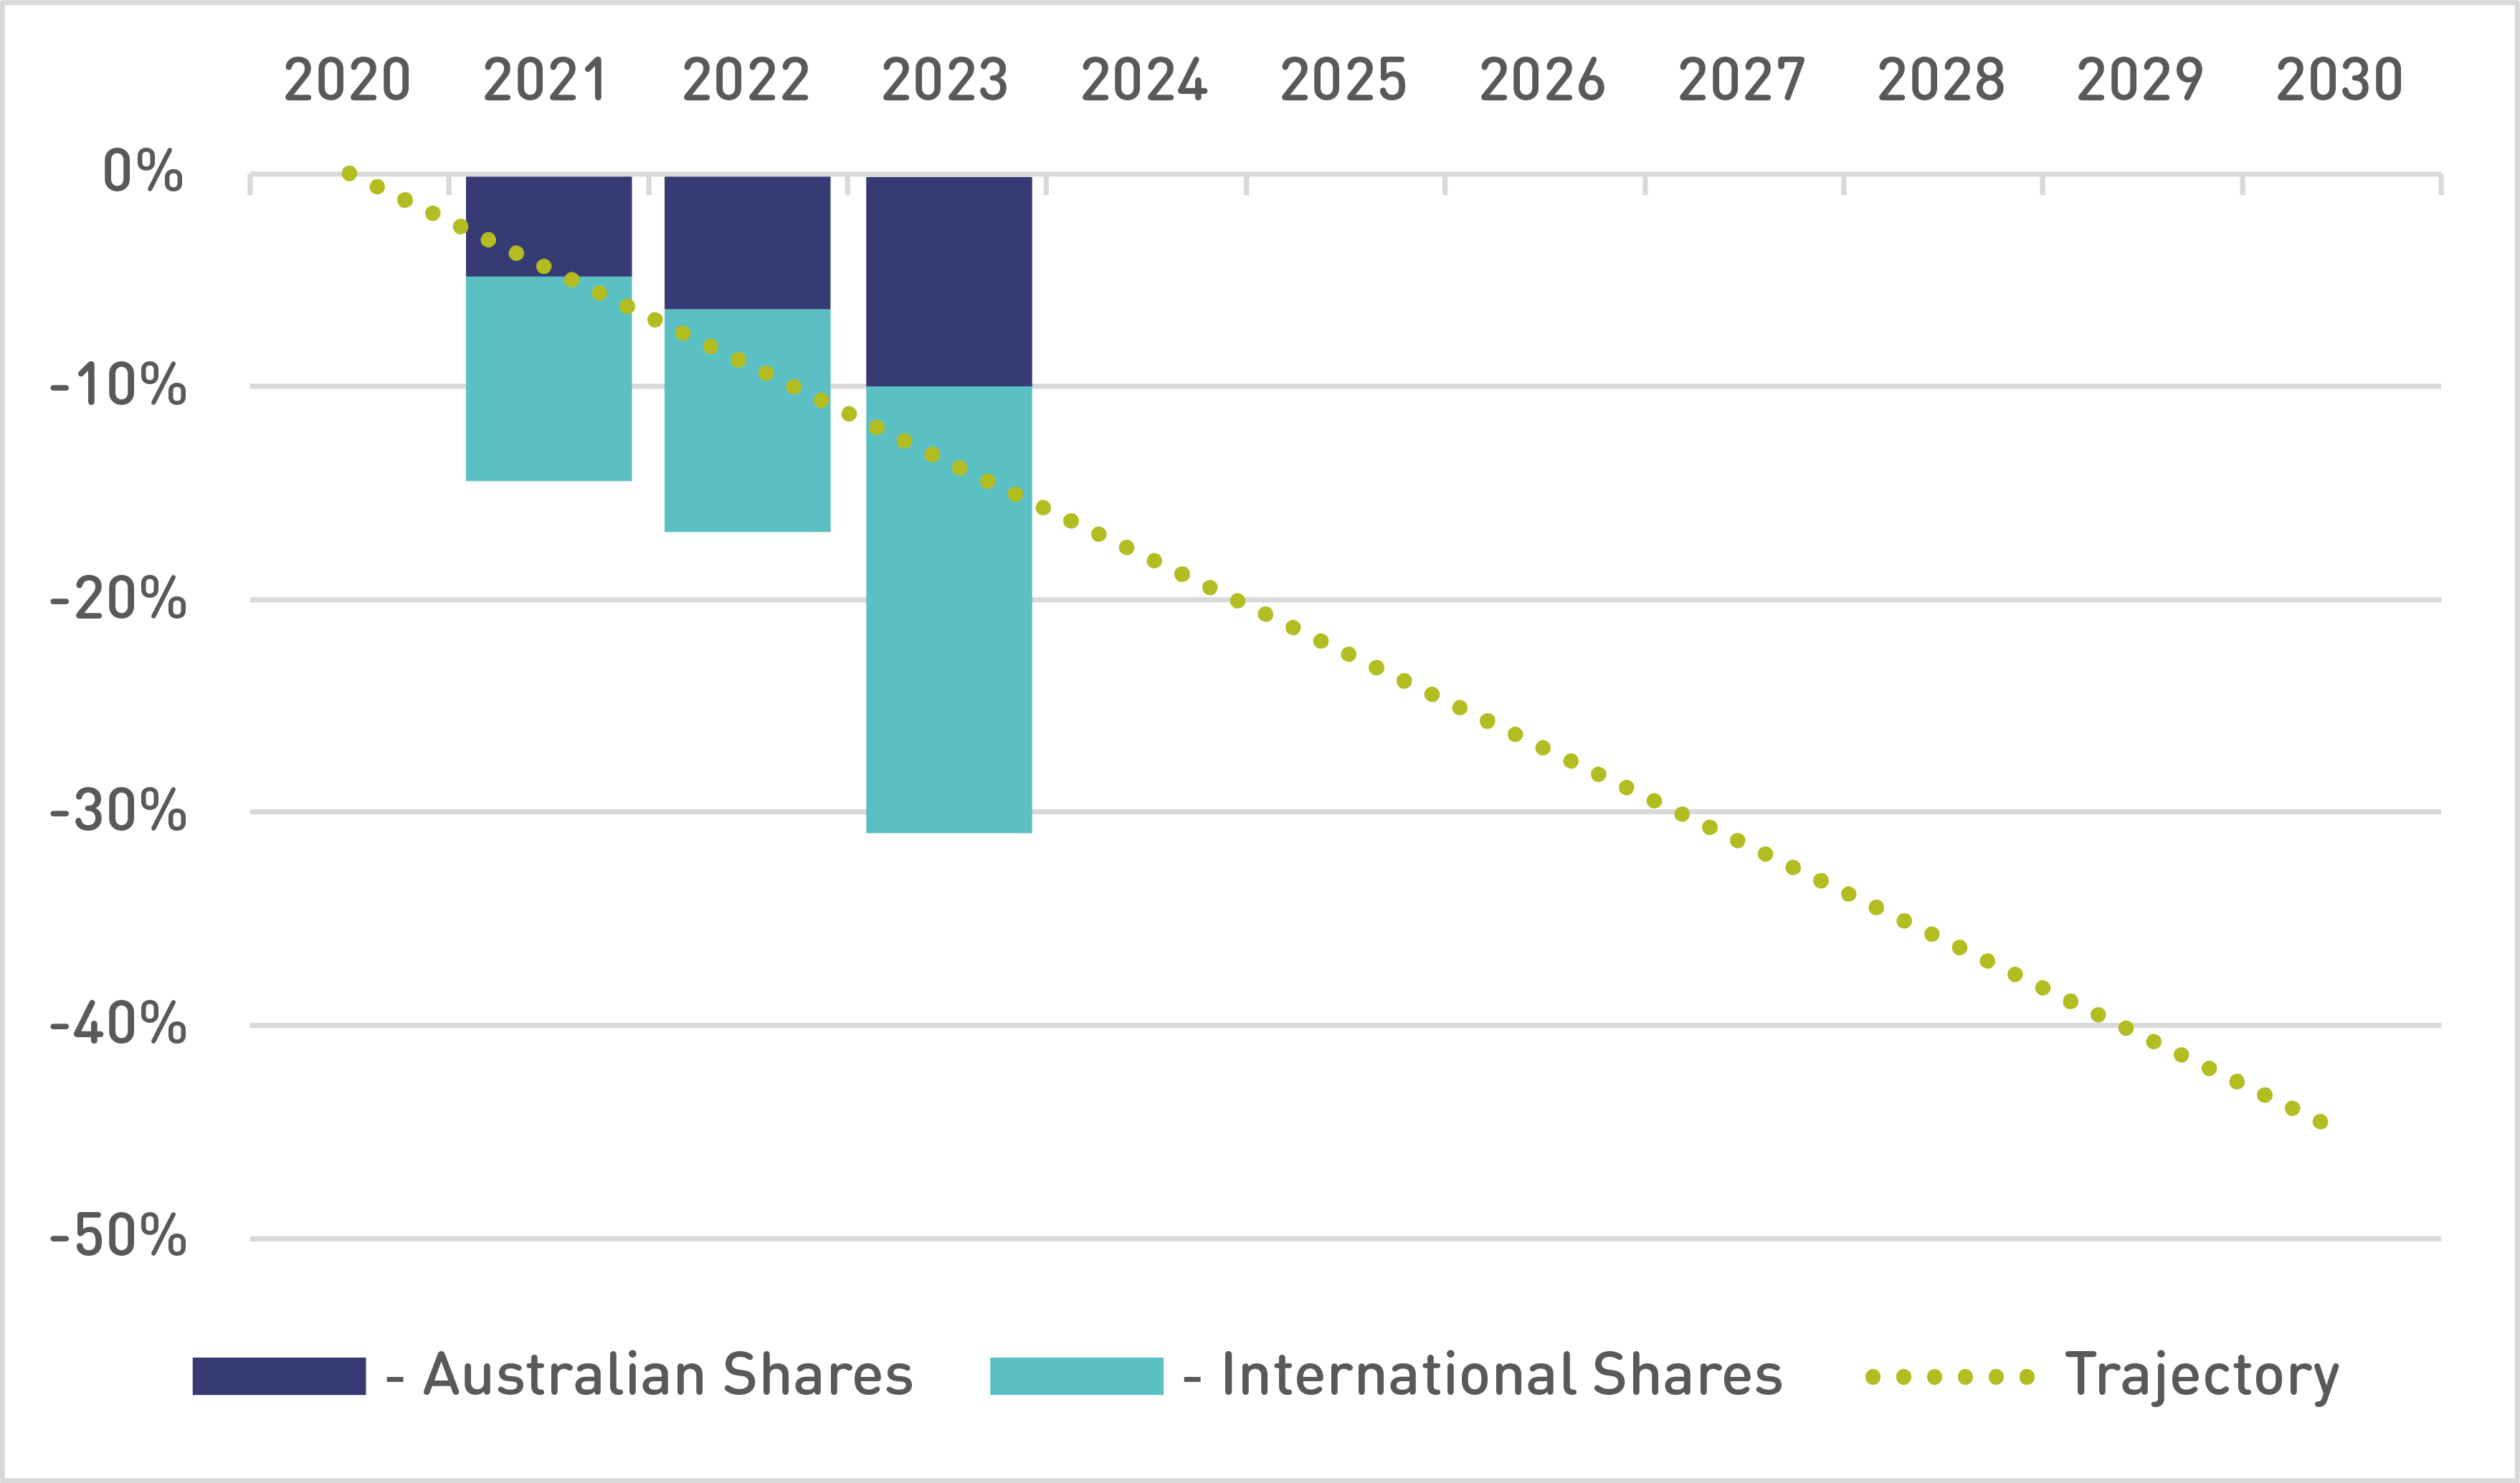 This graphs shows the carbon intensity progress against a target of 45%. The chart starts in 202 with a baseline for Australian Shares and International Shares of 0%. Australian Shares is -5% in 2021, -6% in 2022 and -10% in 2023. International Shares is -10% in 2021, -10% in 2022 and -20% in 2023. Trajectory is -5% in 2021, -9% in 2022, -13.5% in 2023 reaching -45% in 2030.